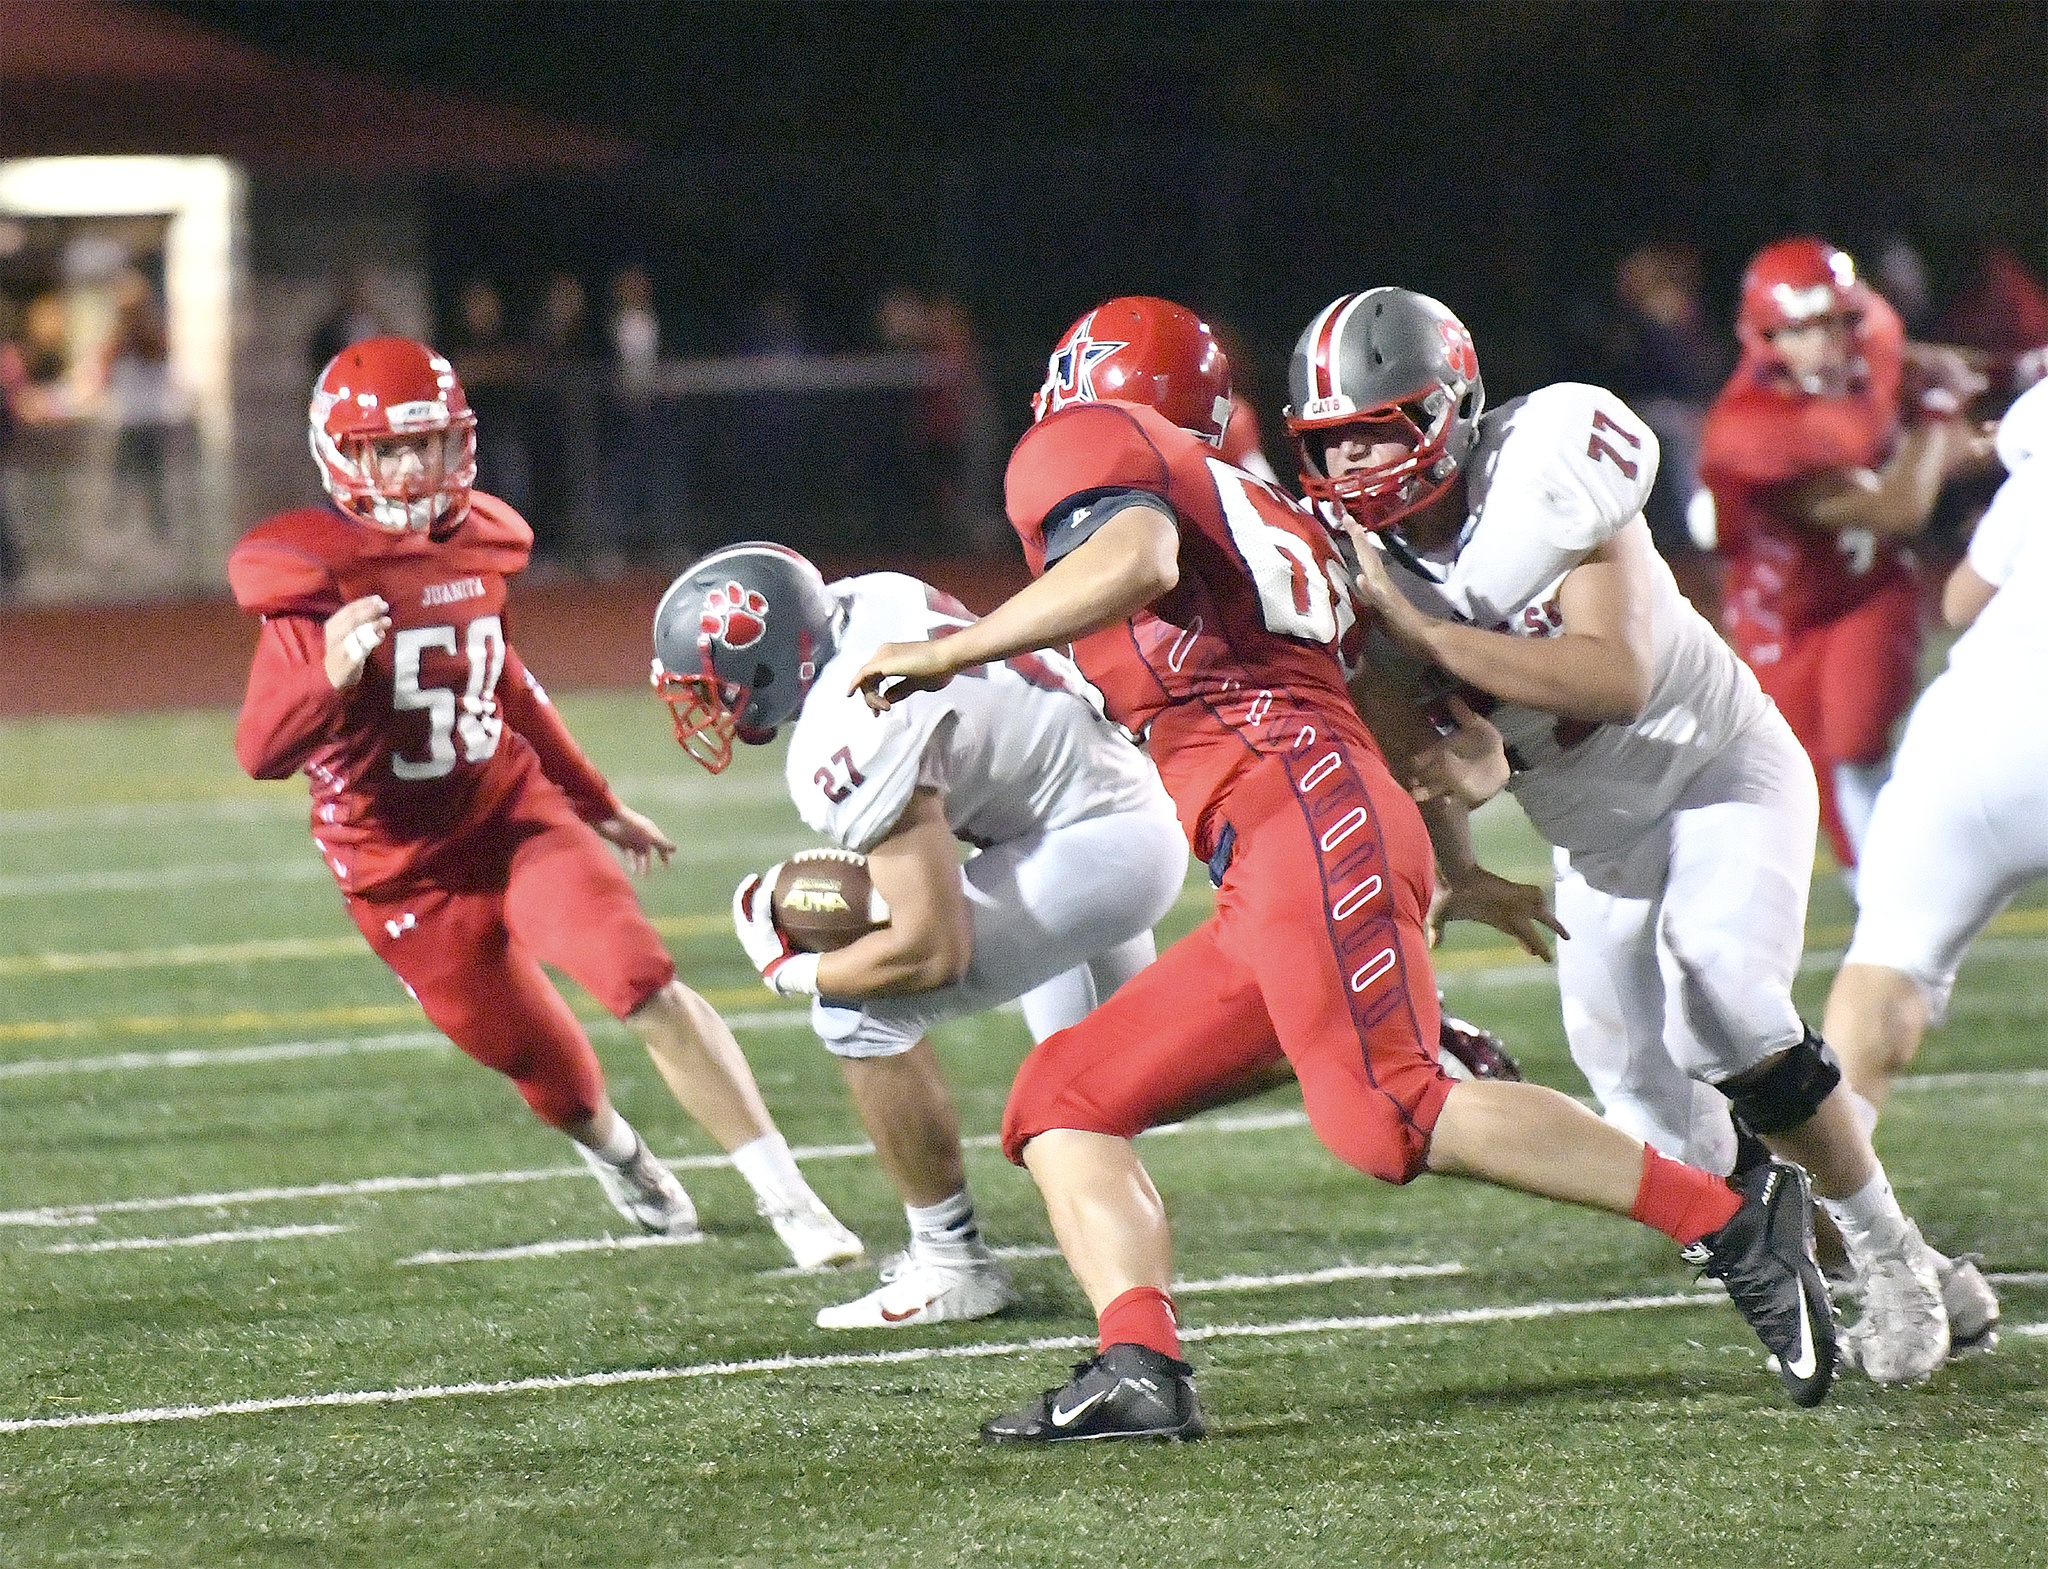 Photo Courtesy of Calder ProductionsWildcats No. 27 Jack Weidenbach weaves past a Juanita Rebel in the opening game of the season for Mount Si last Friday at Juanita. He was the leading rusher in the game